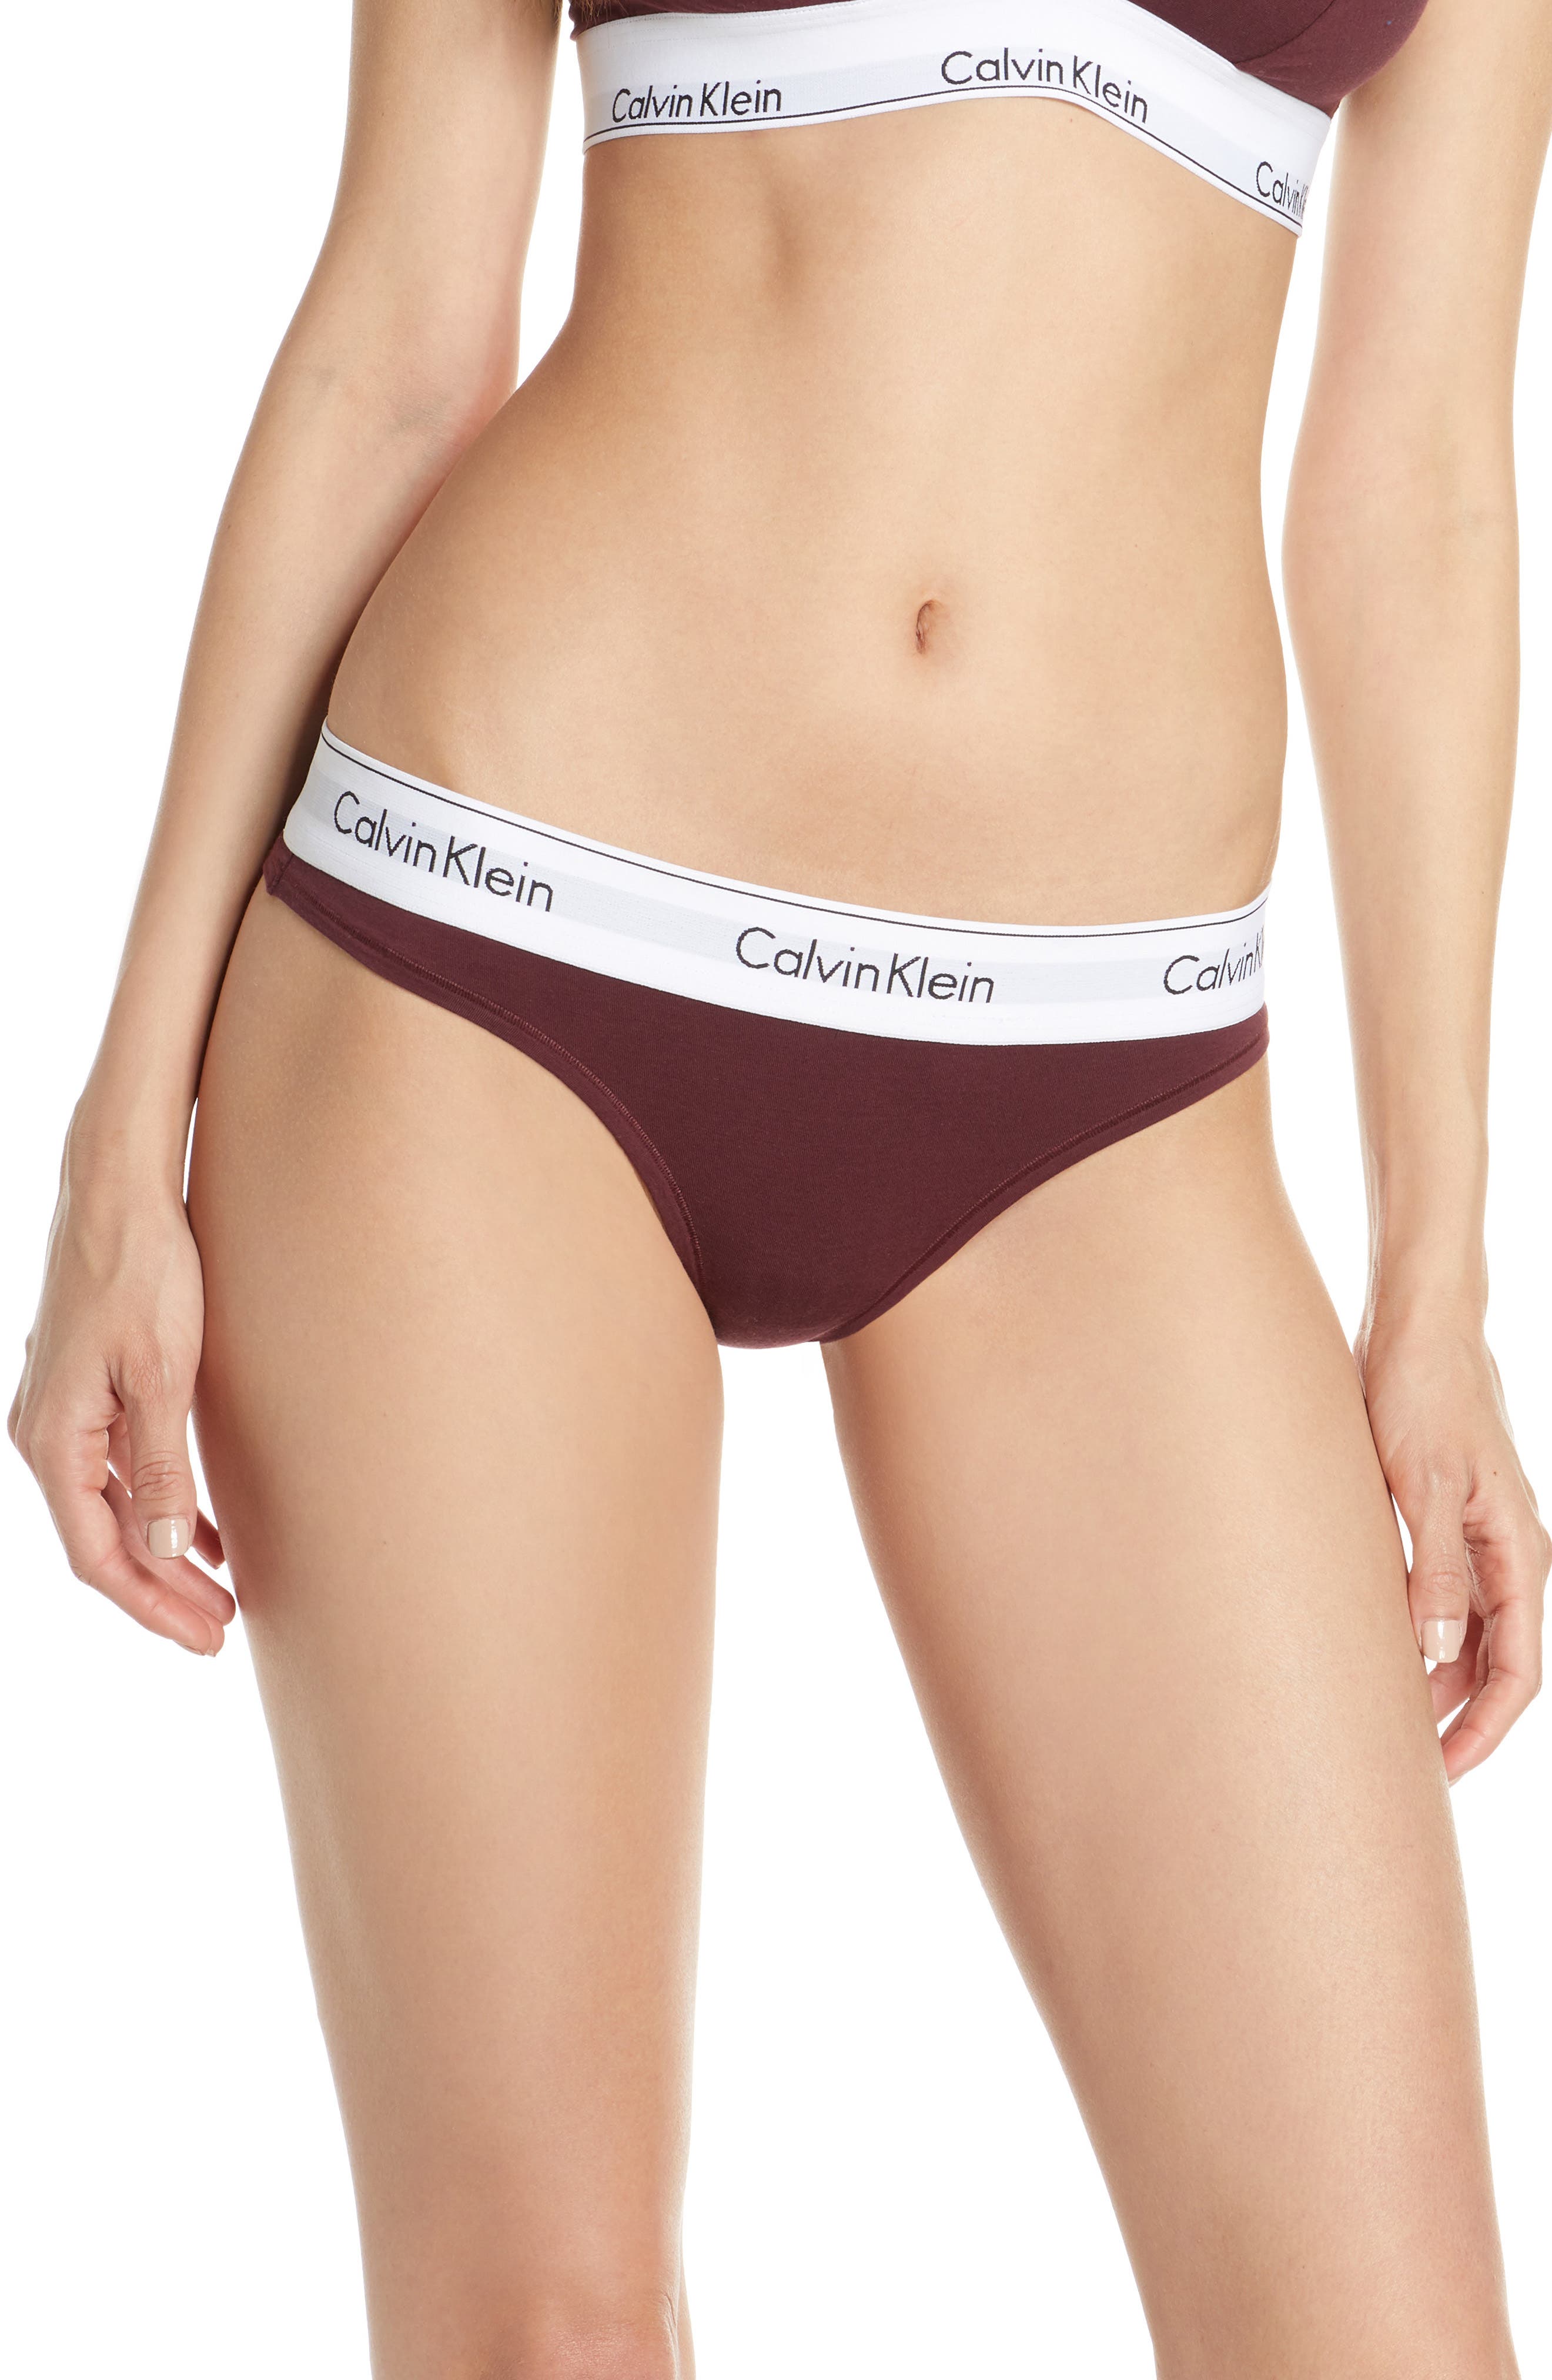 UPC 011531769021 product image for Women's Calvin Klein Logo Thong, Size Small - Burgundy | upcitemdb.com